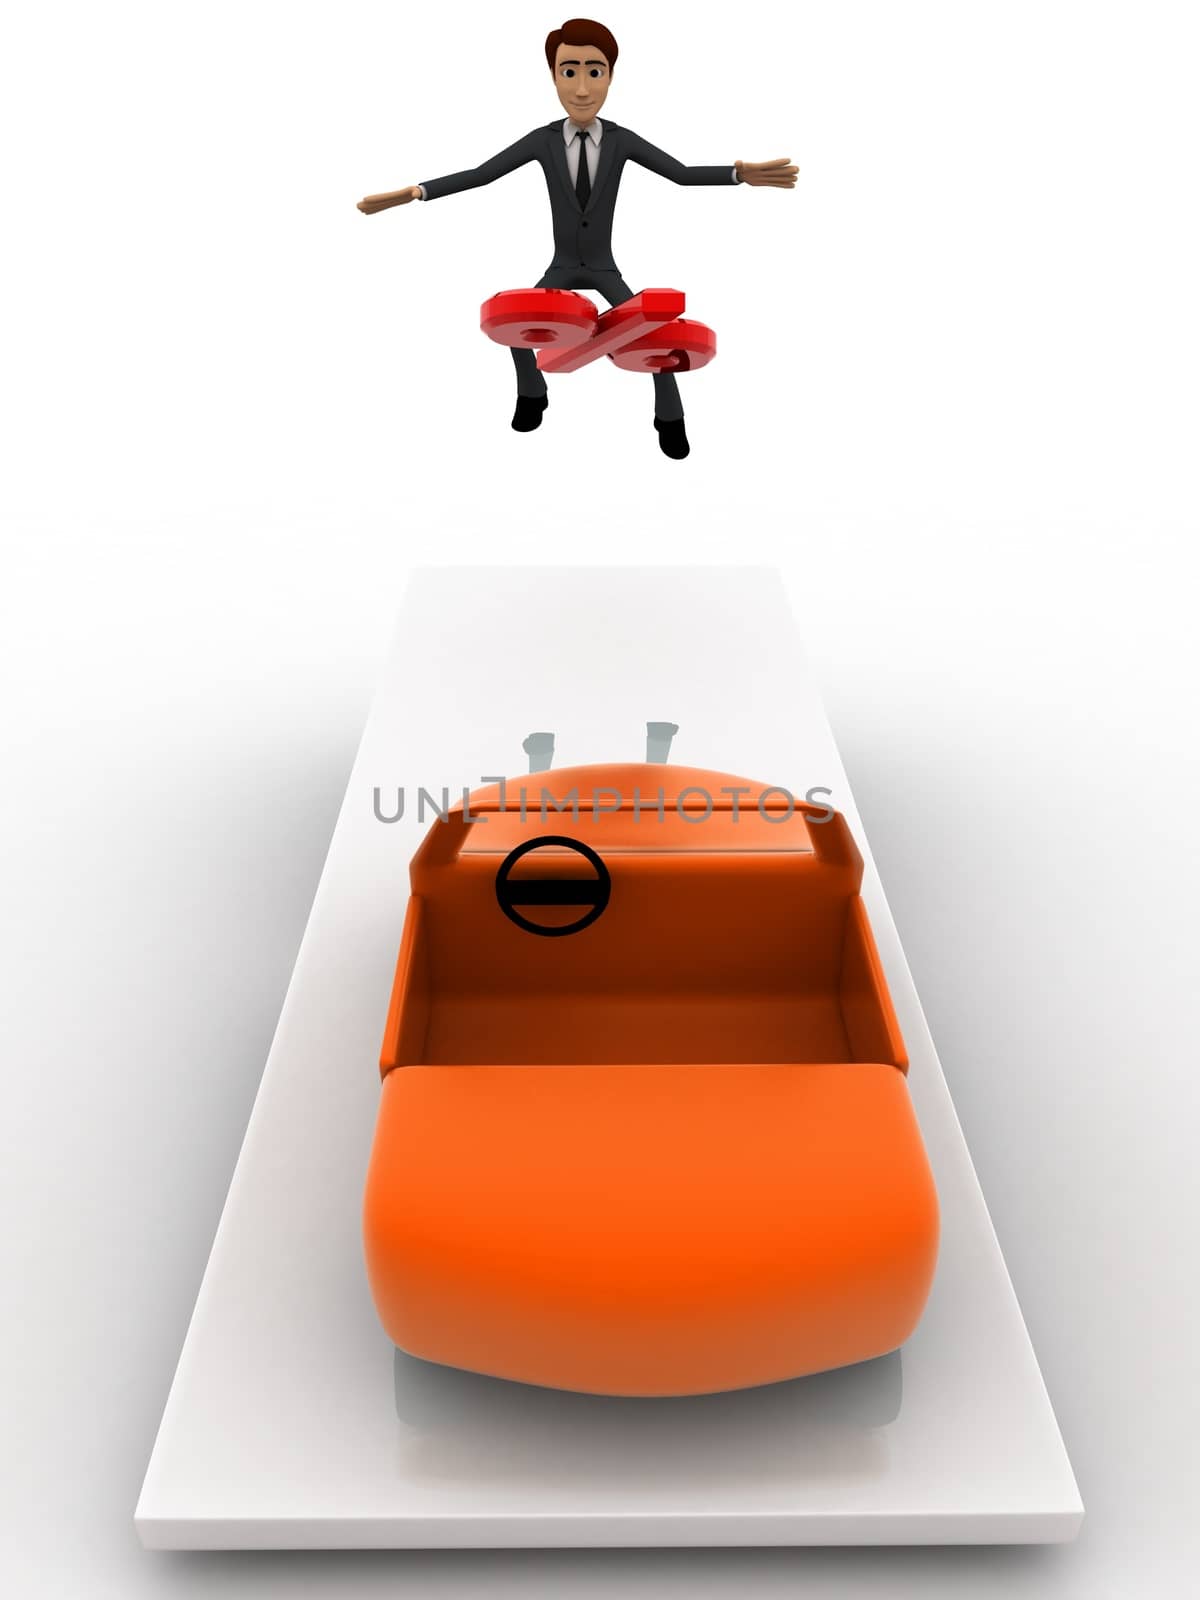 3d man jumping on seesaw with car and percentage symbol on it concept by touchmenithin@gmail.com